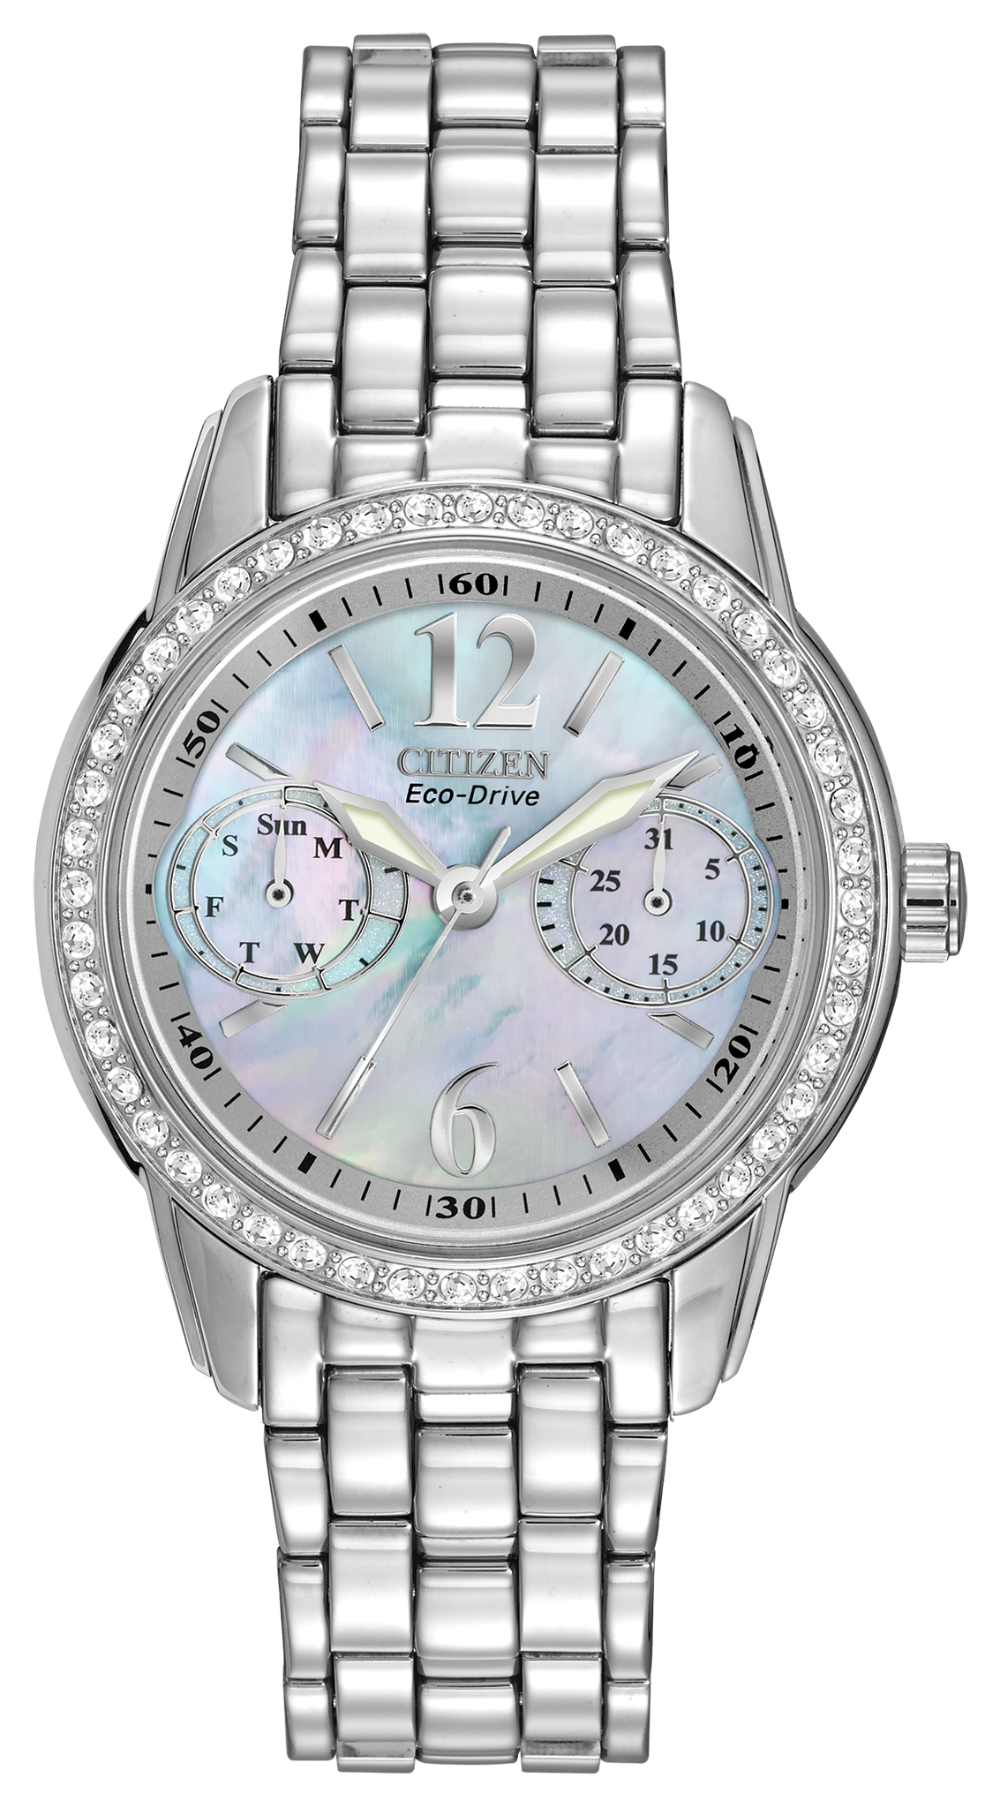 This Silhouette Crystal Citizen Eco Drive Ladies Watch Browne S Jewelers